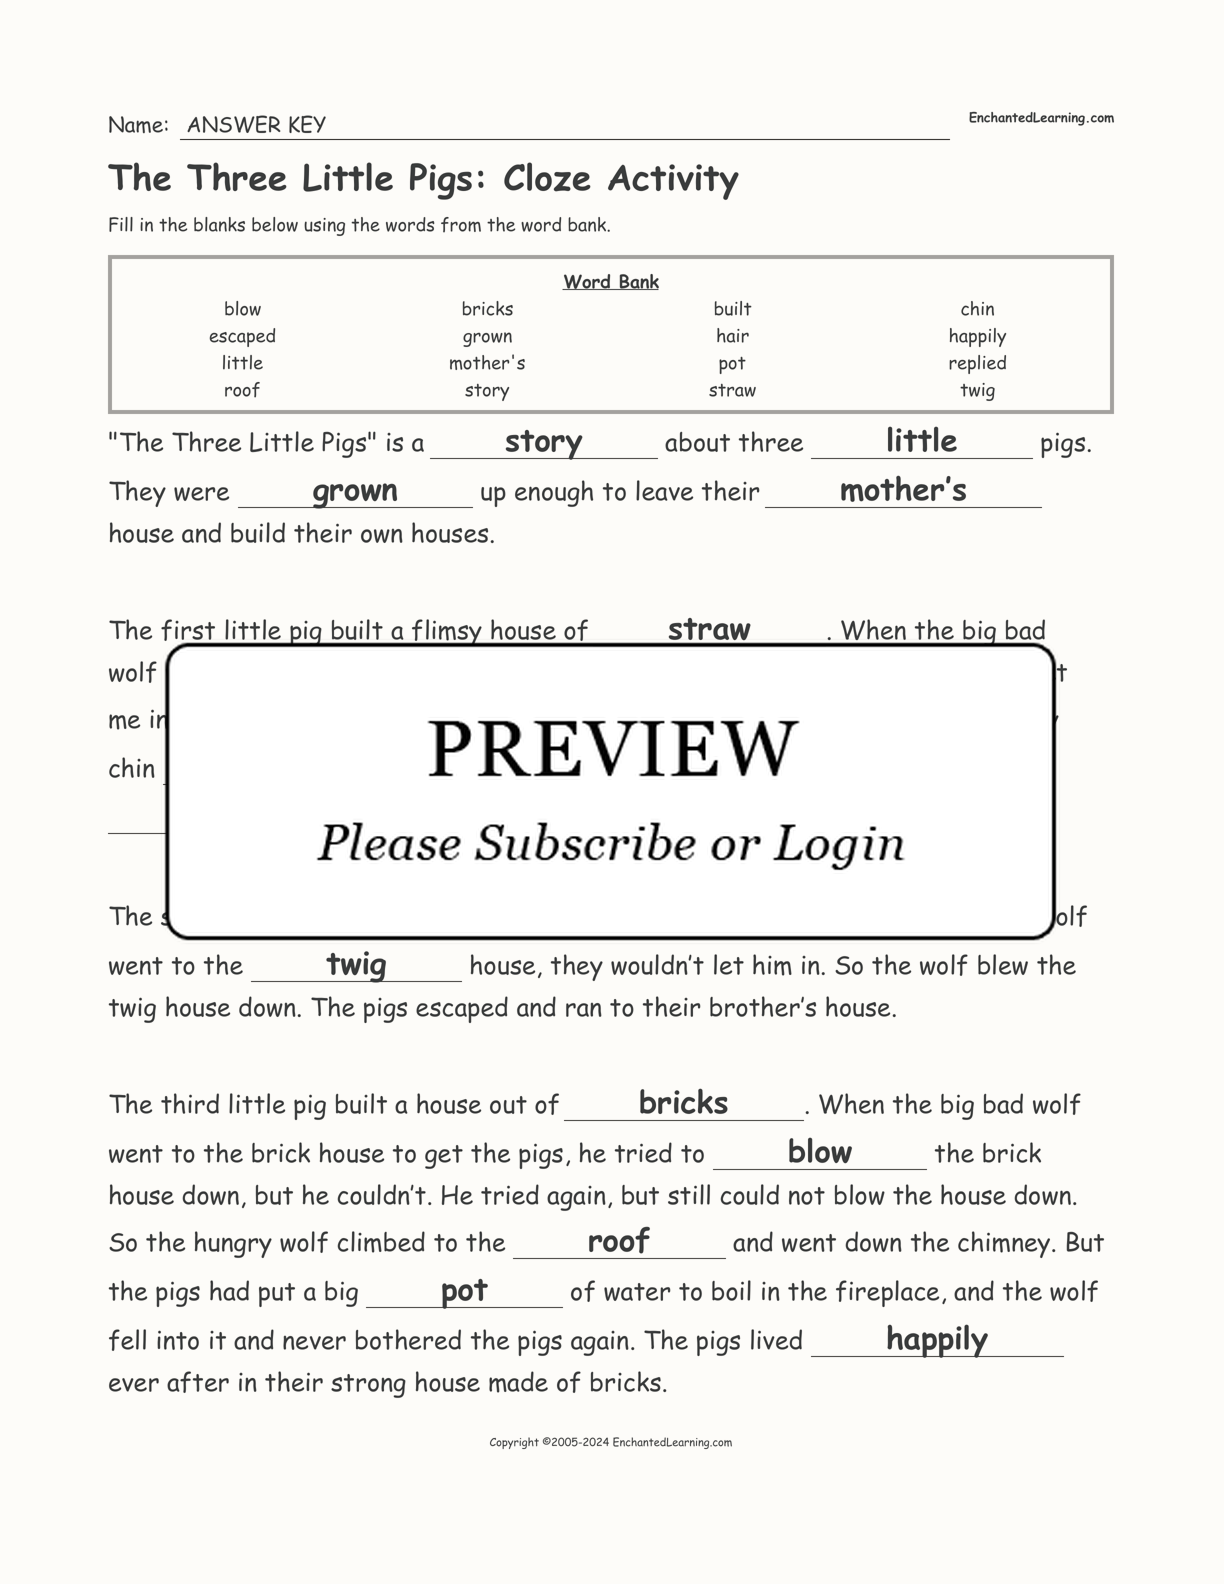 The Three Little Pigs: Cloze Activity interactive worksheet page 2